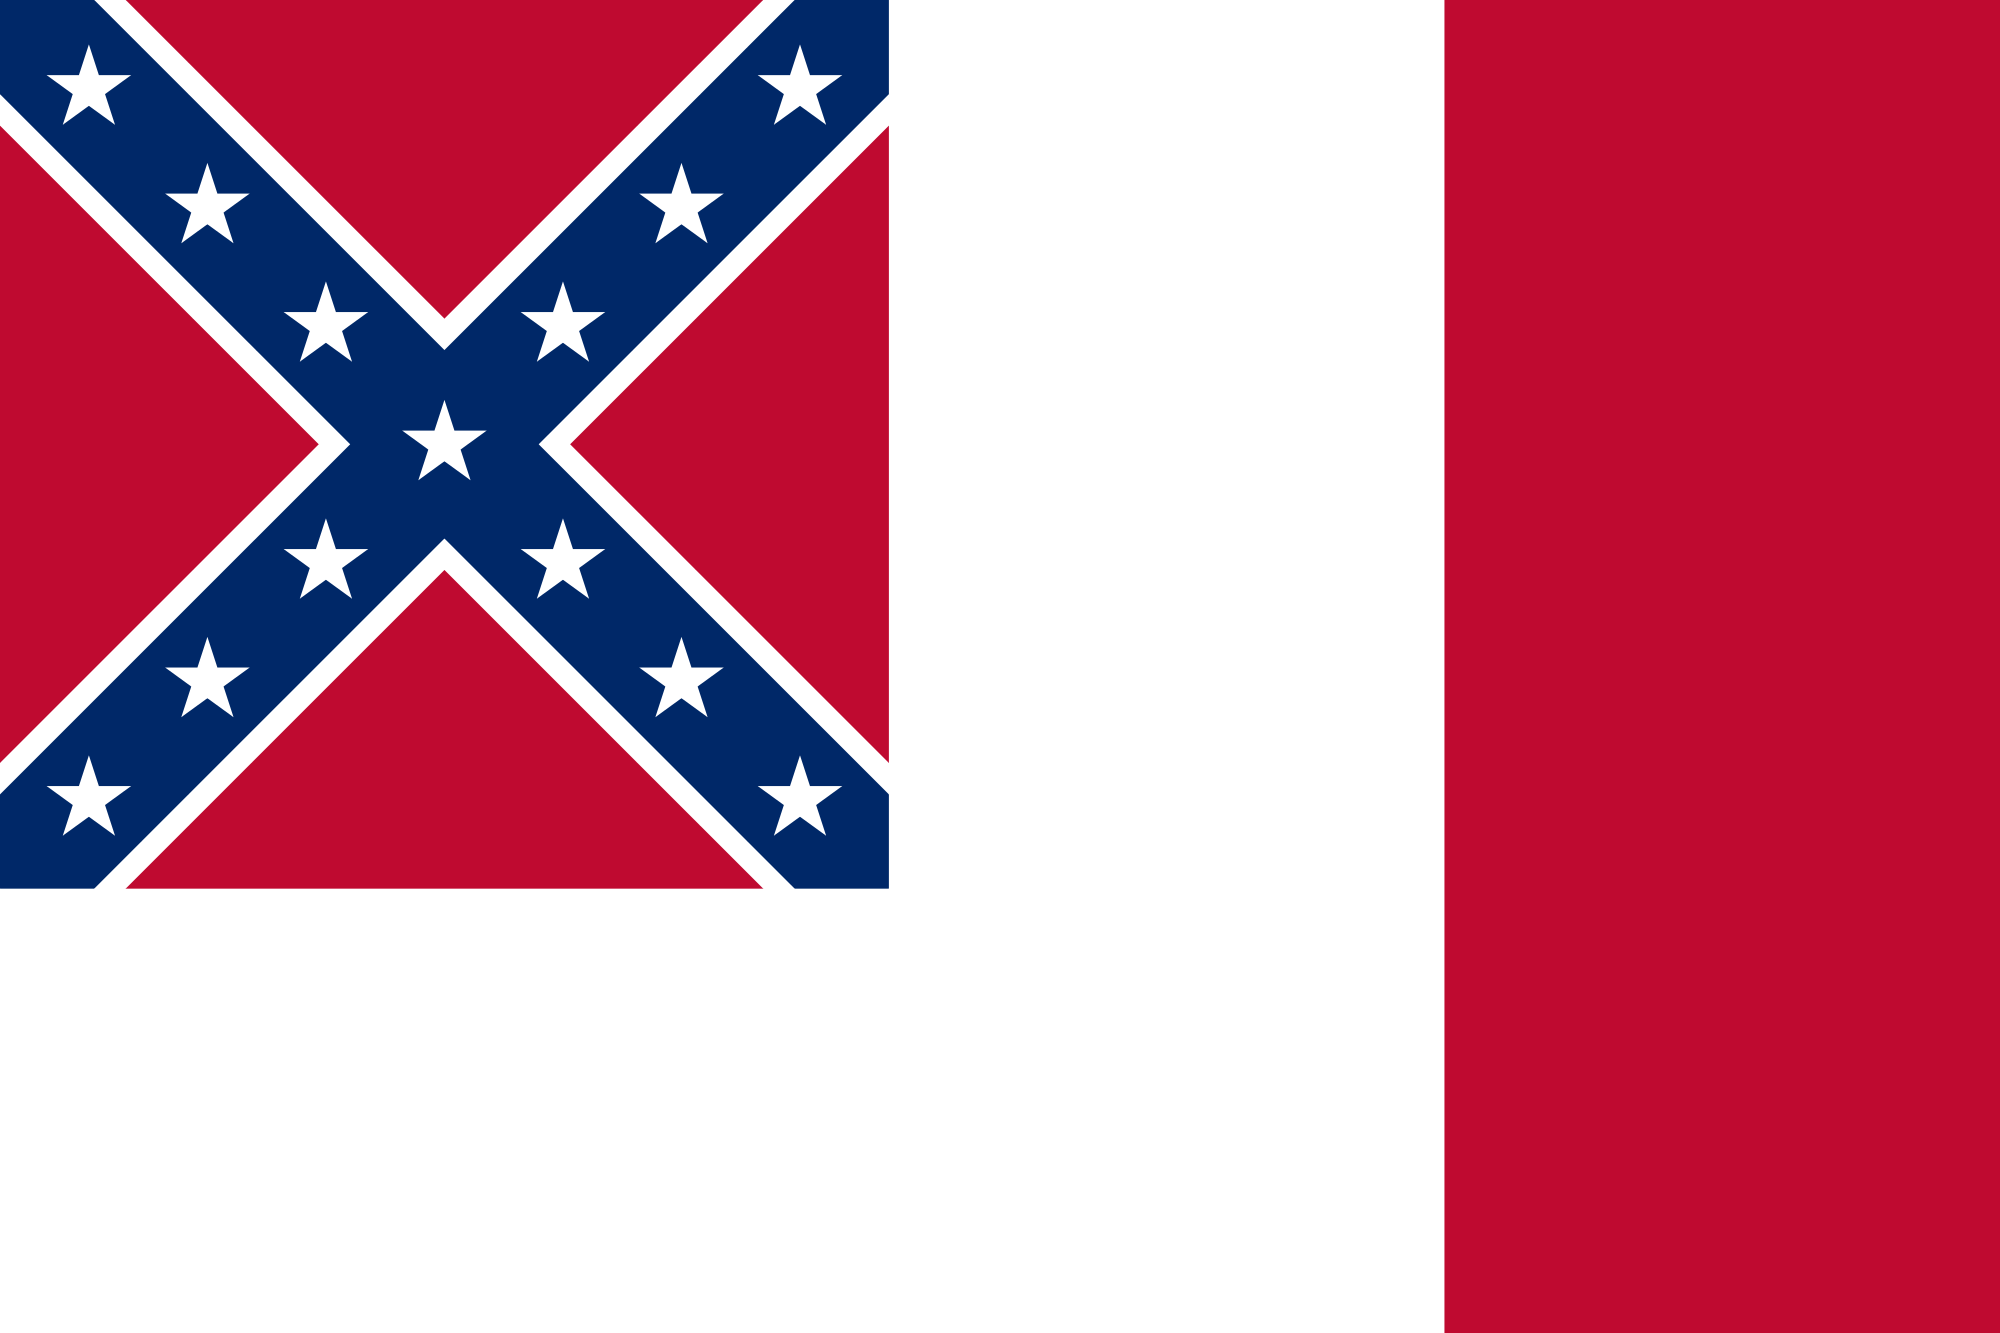 The third Confederate flag of the Confederate States of America. 